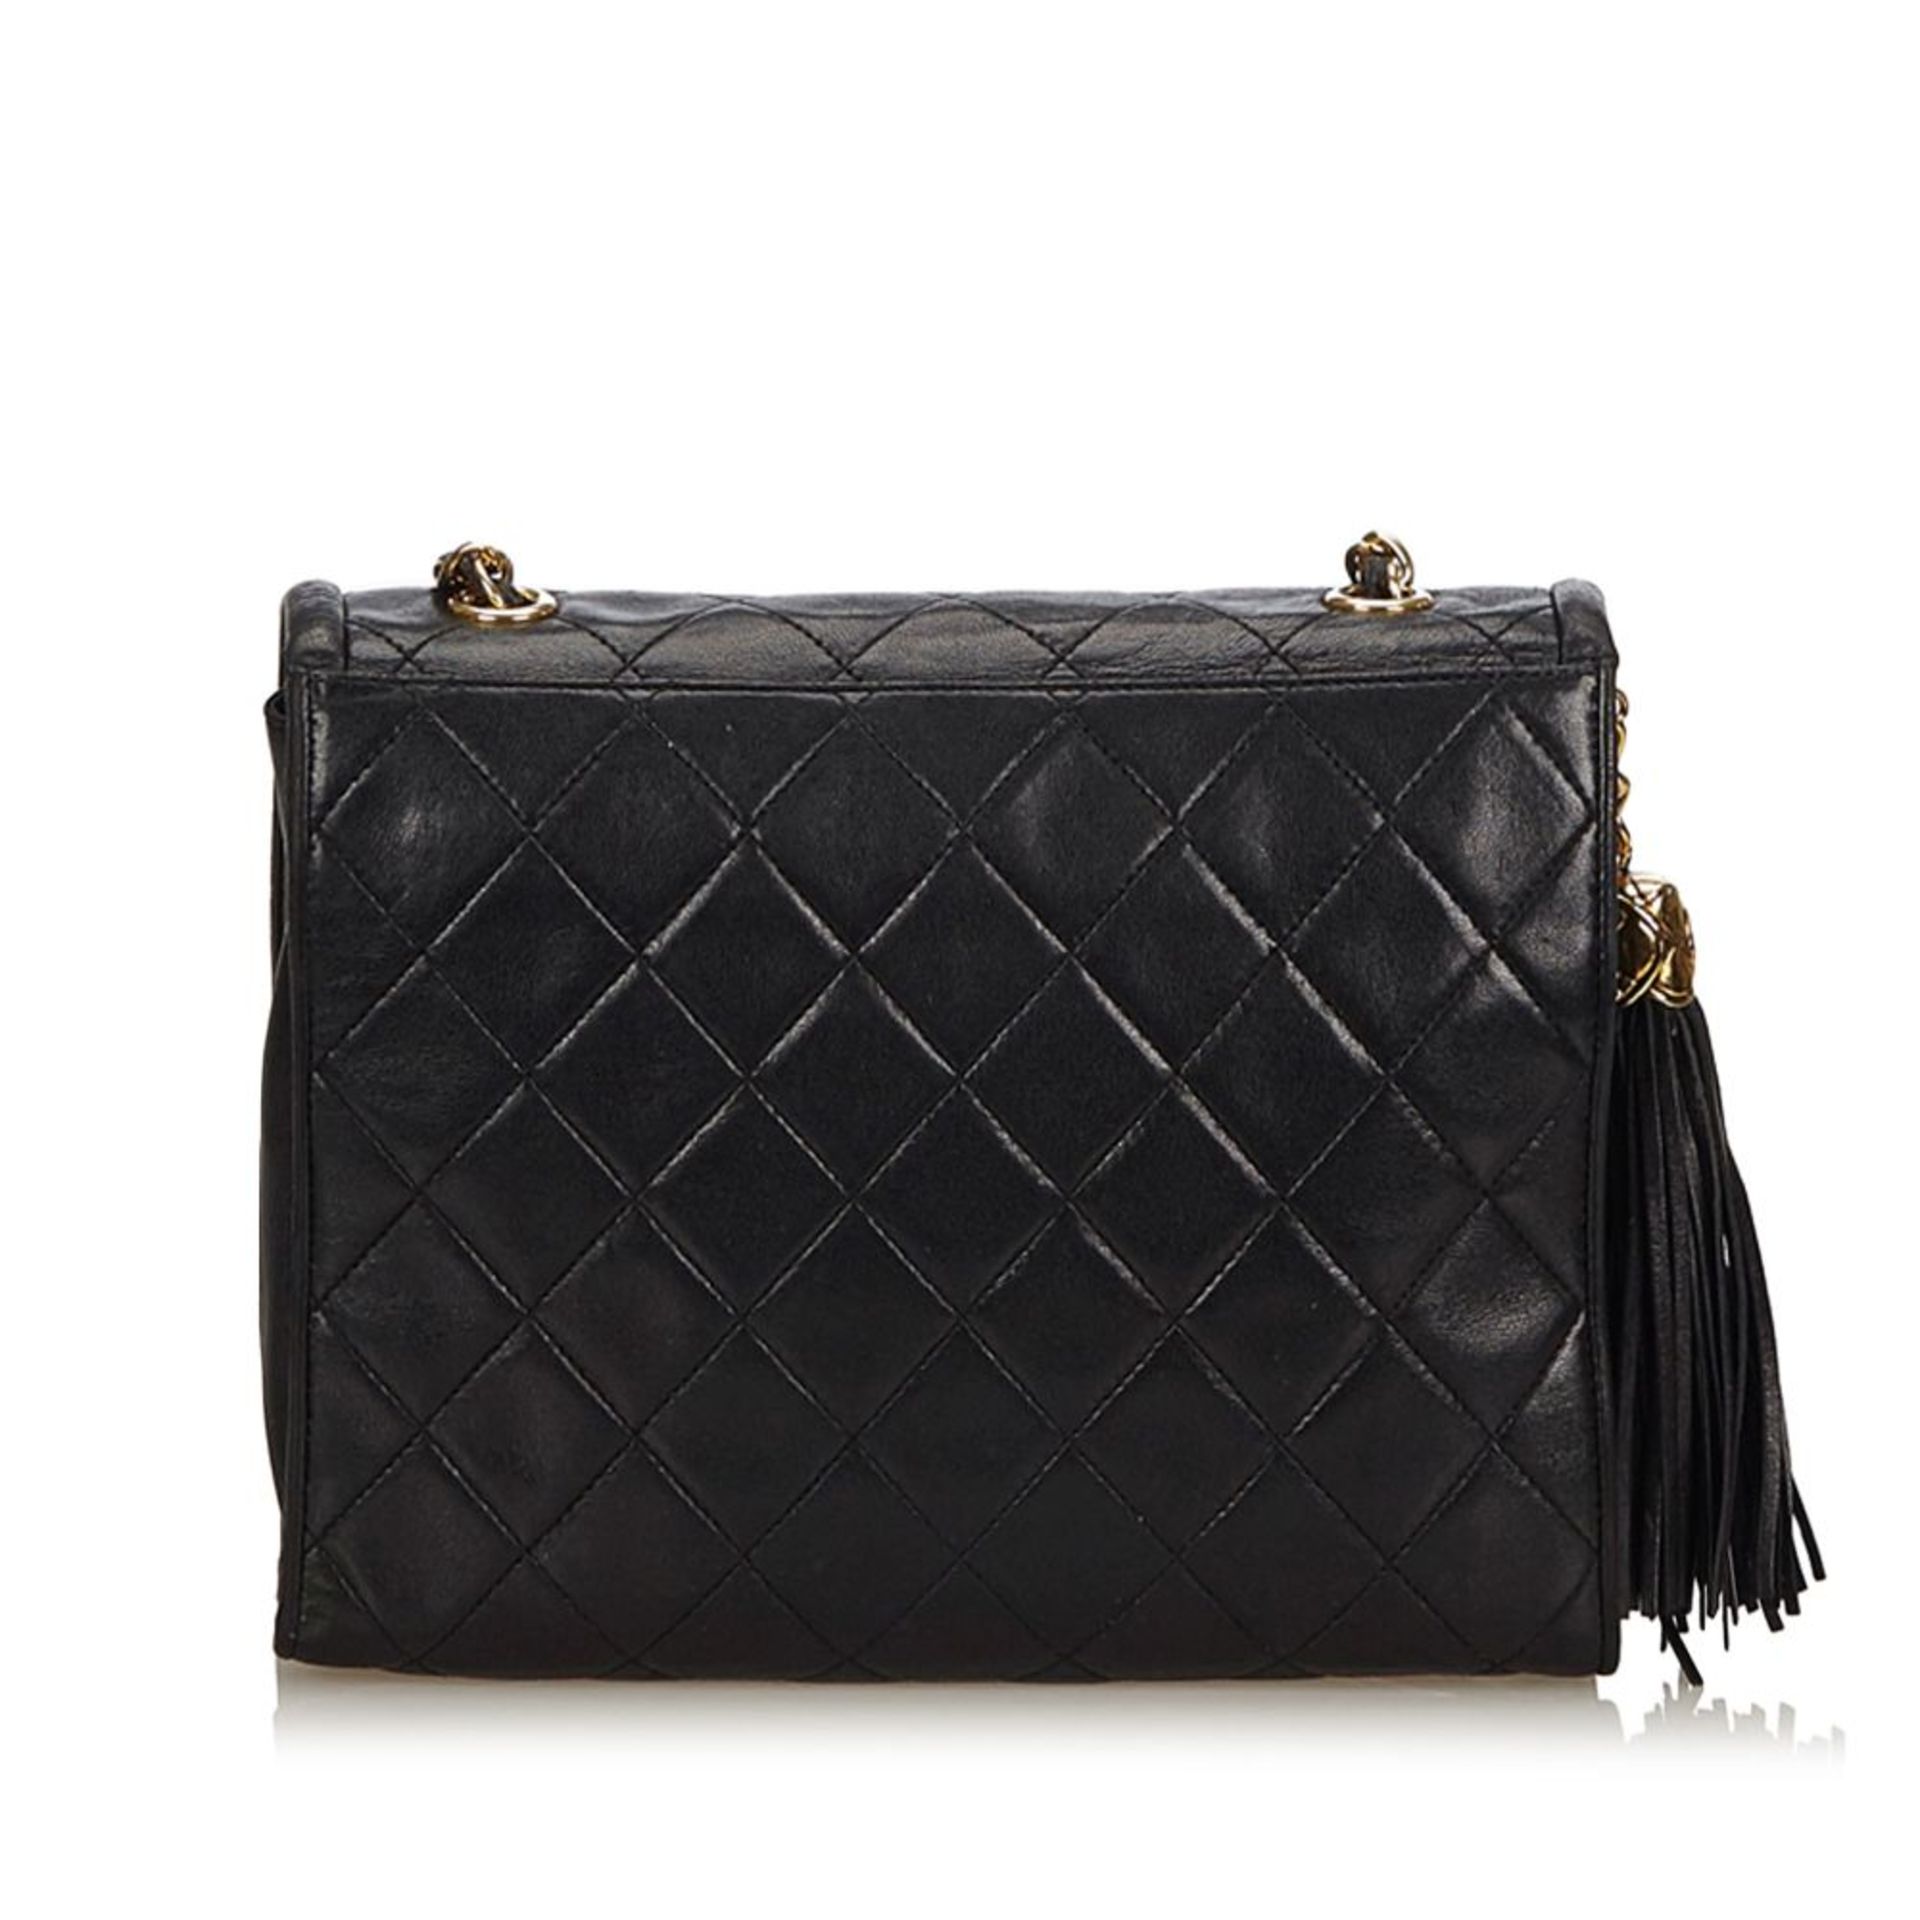 A Chanel matelassé tassel double flap shoulder bag,featuring a lambskin leather body, gold-tone - Image 3 of 5